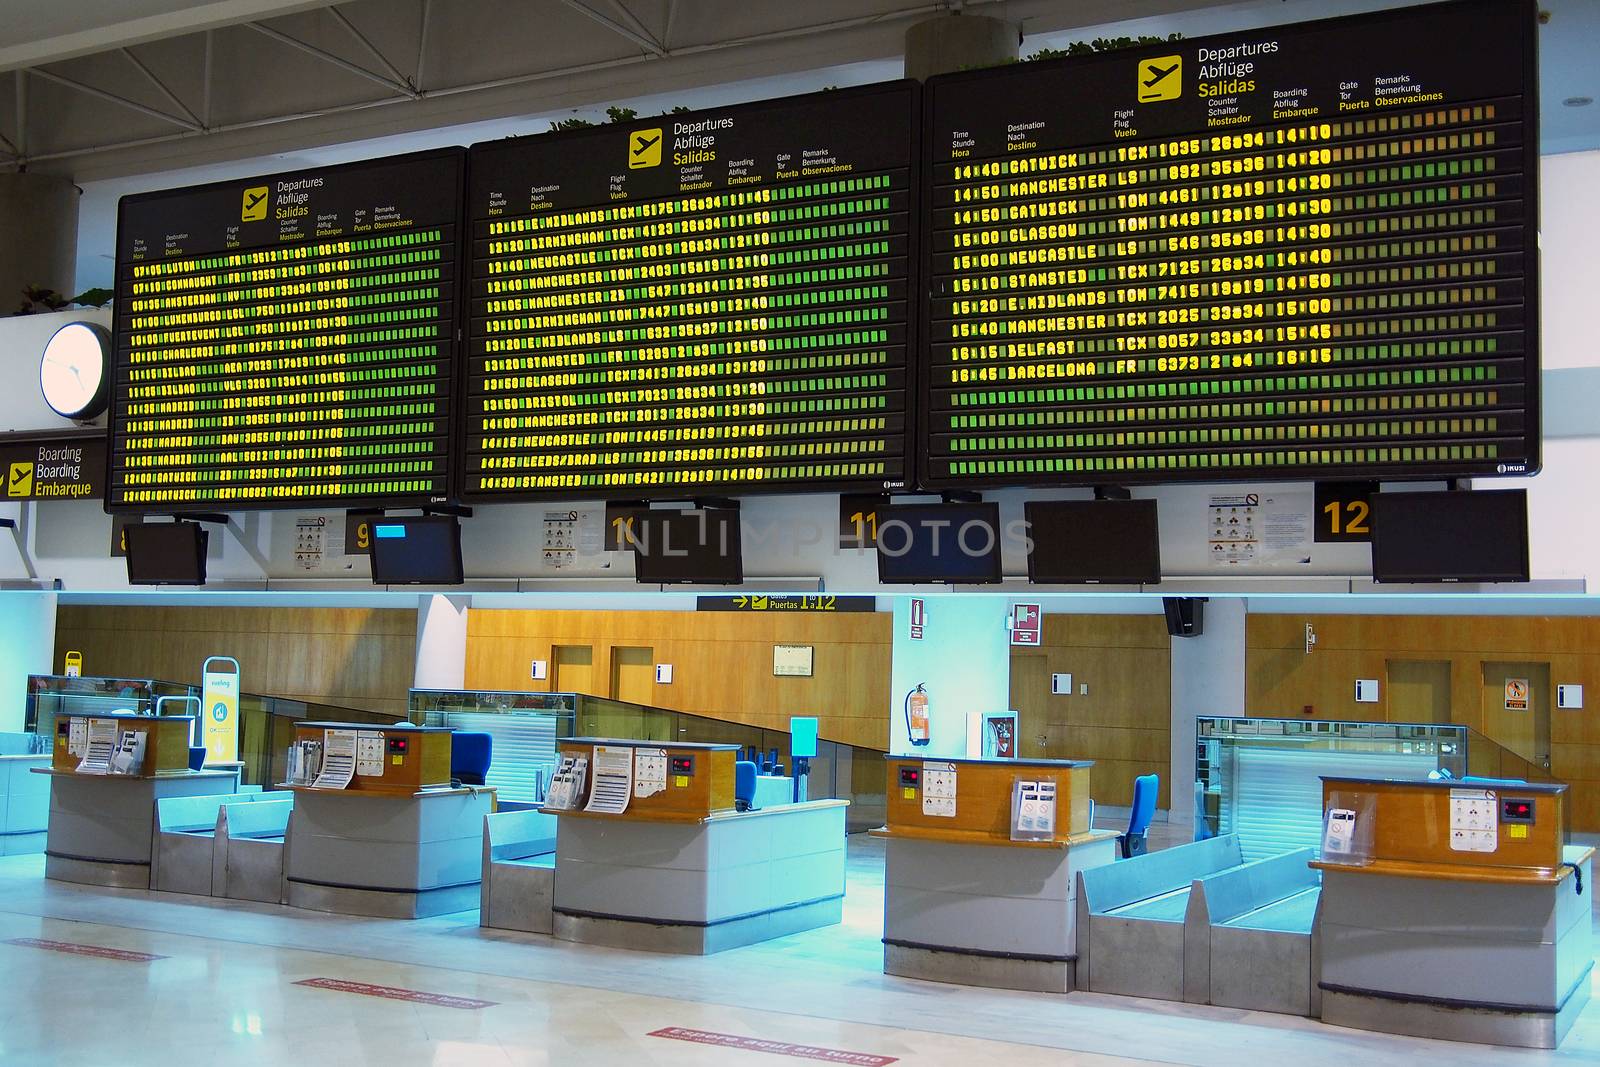 Departure and arrival boards at the airport